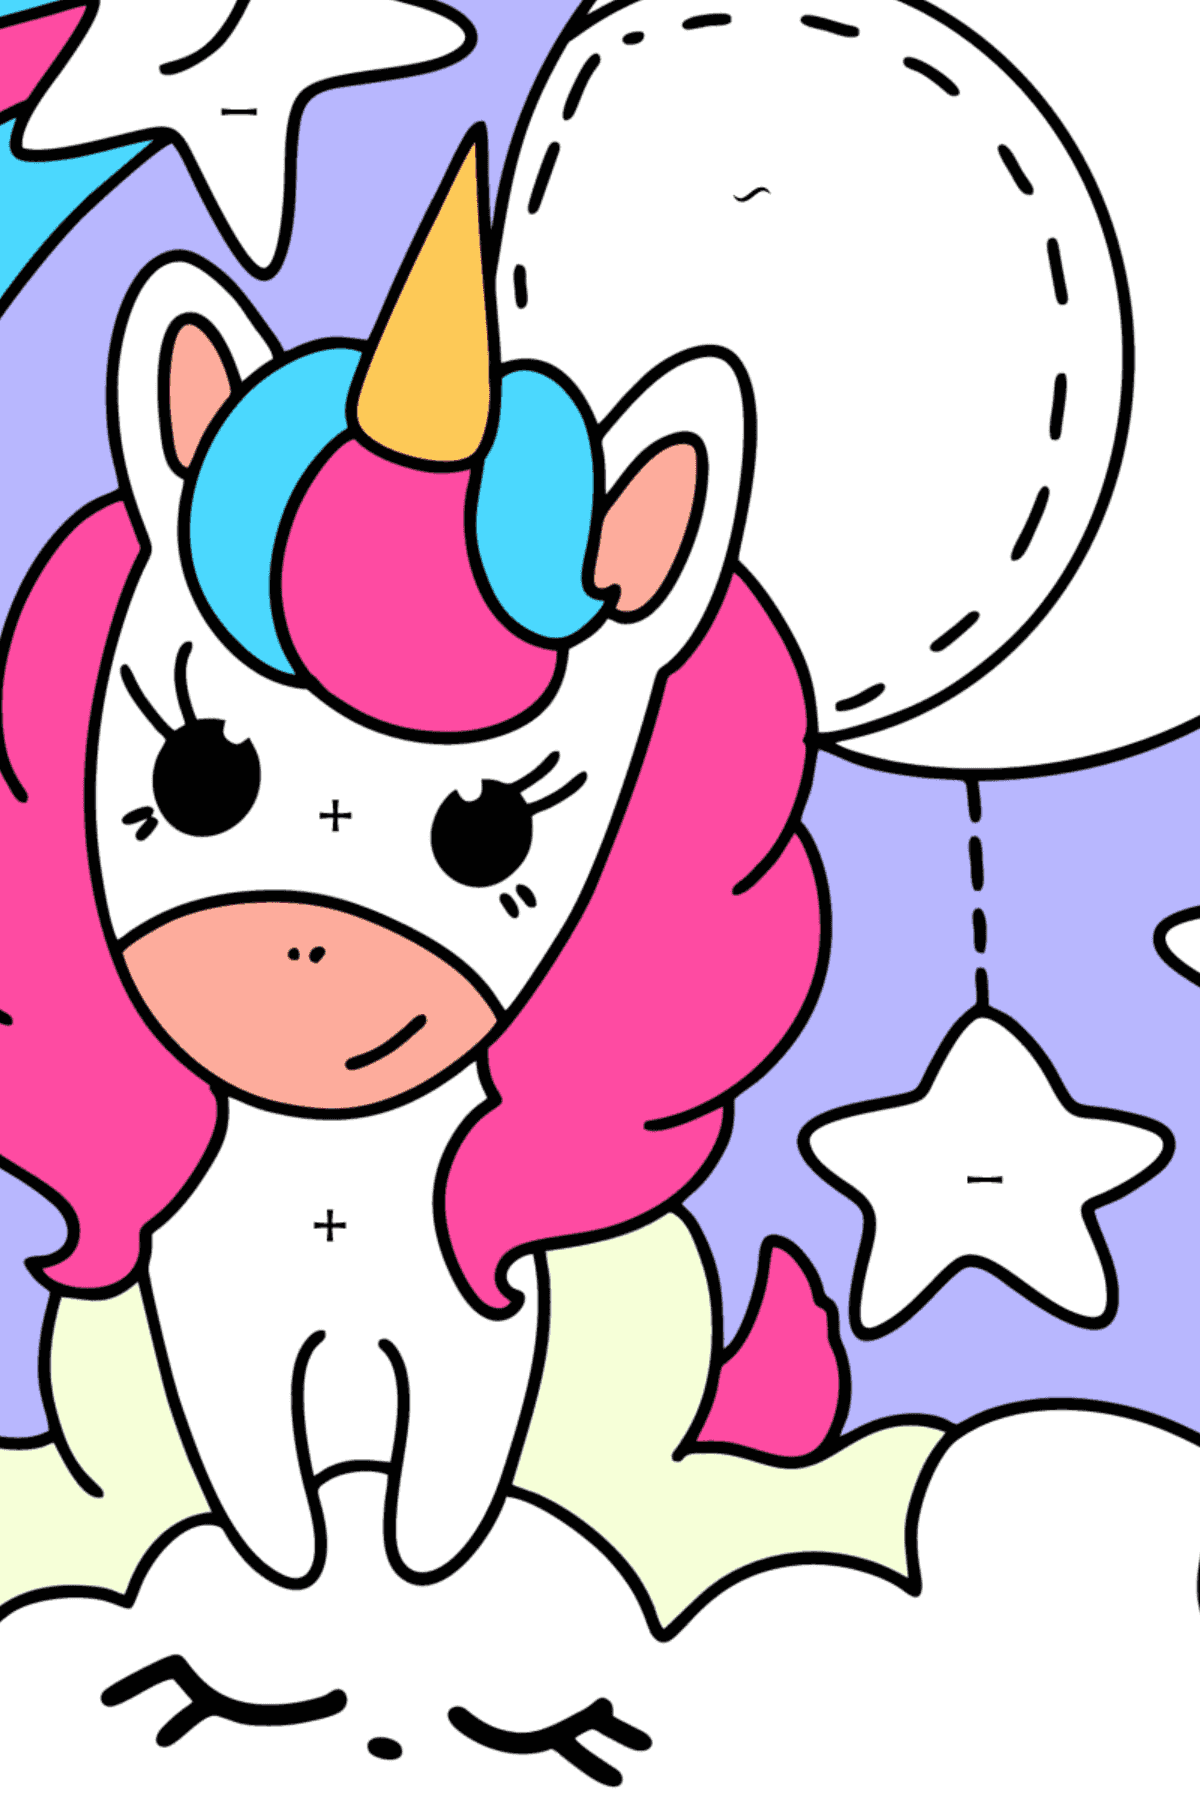 Moon unicorn coloring page - Coloring by Symbols for Kids